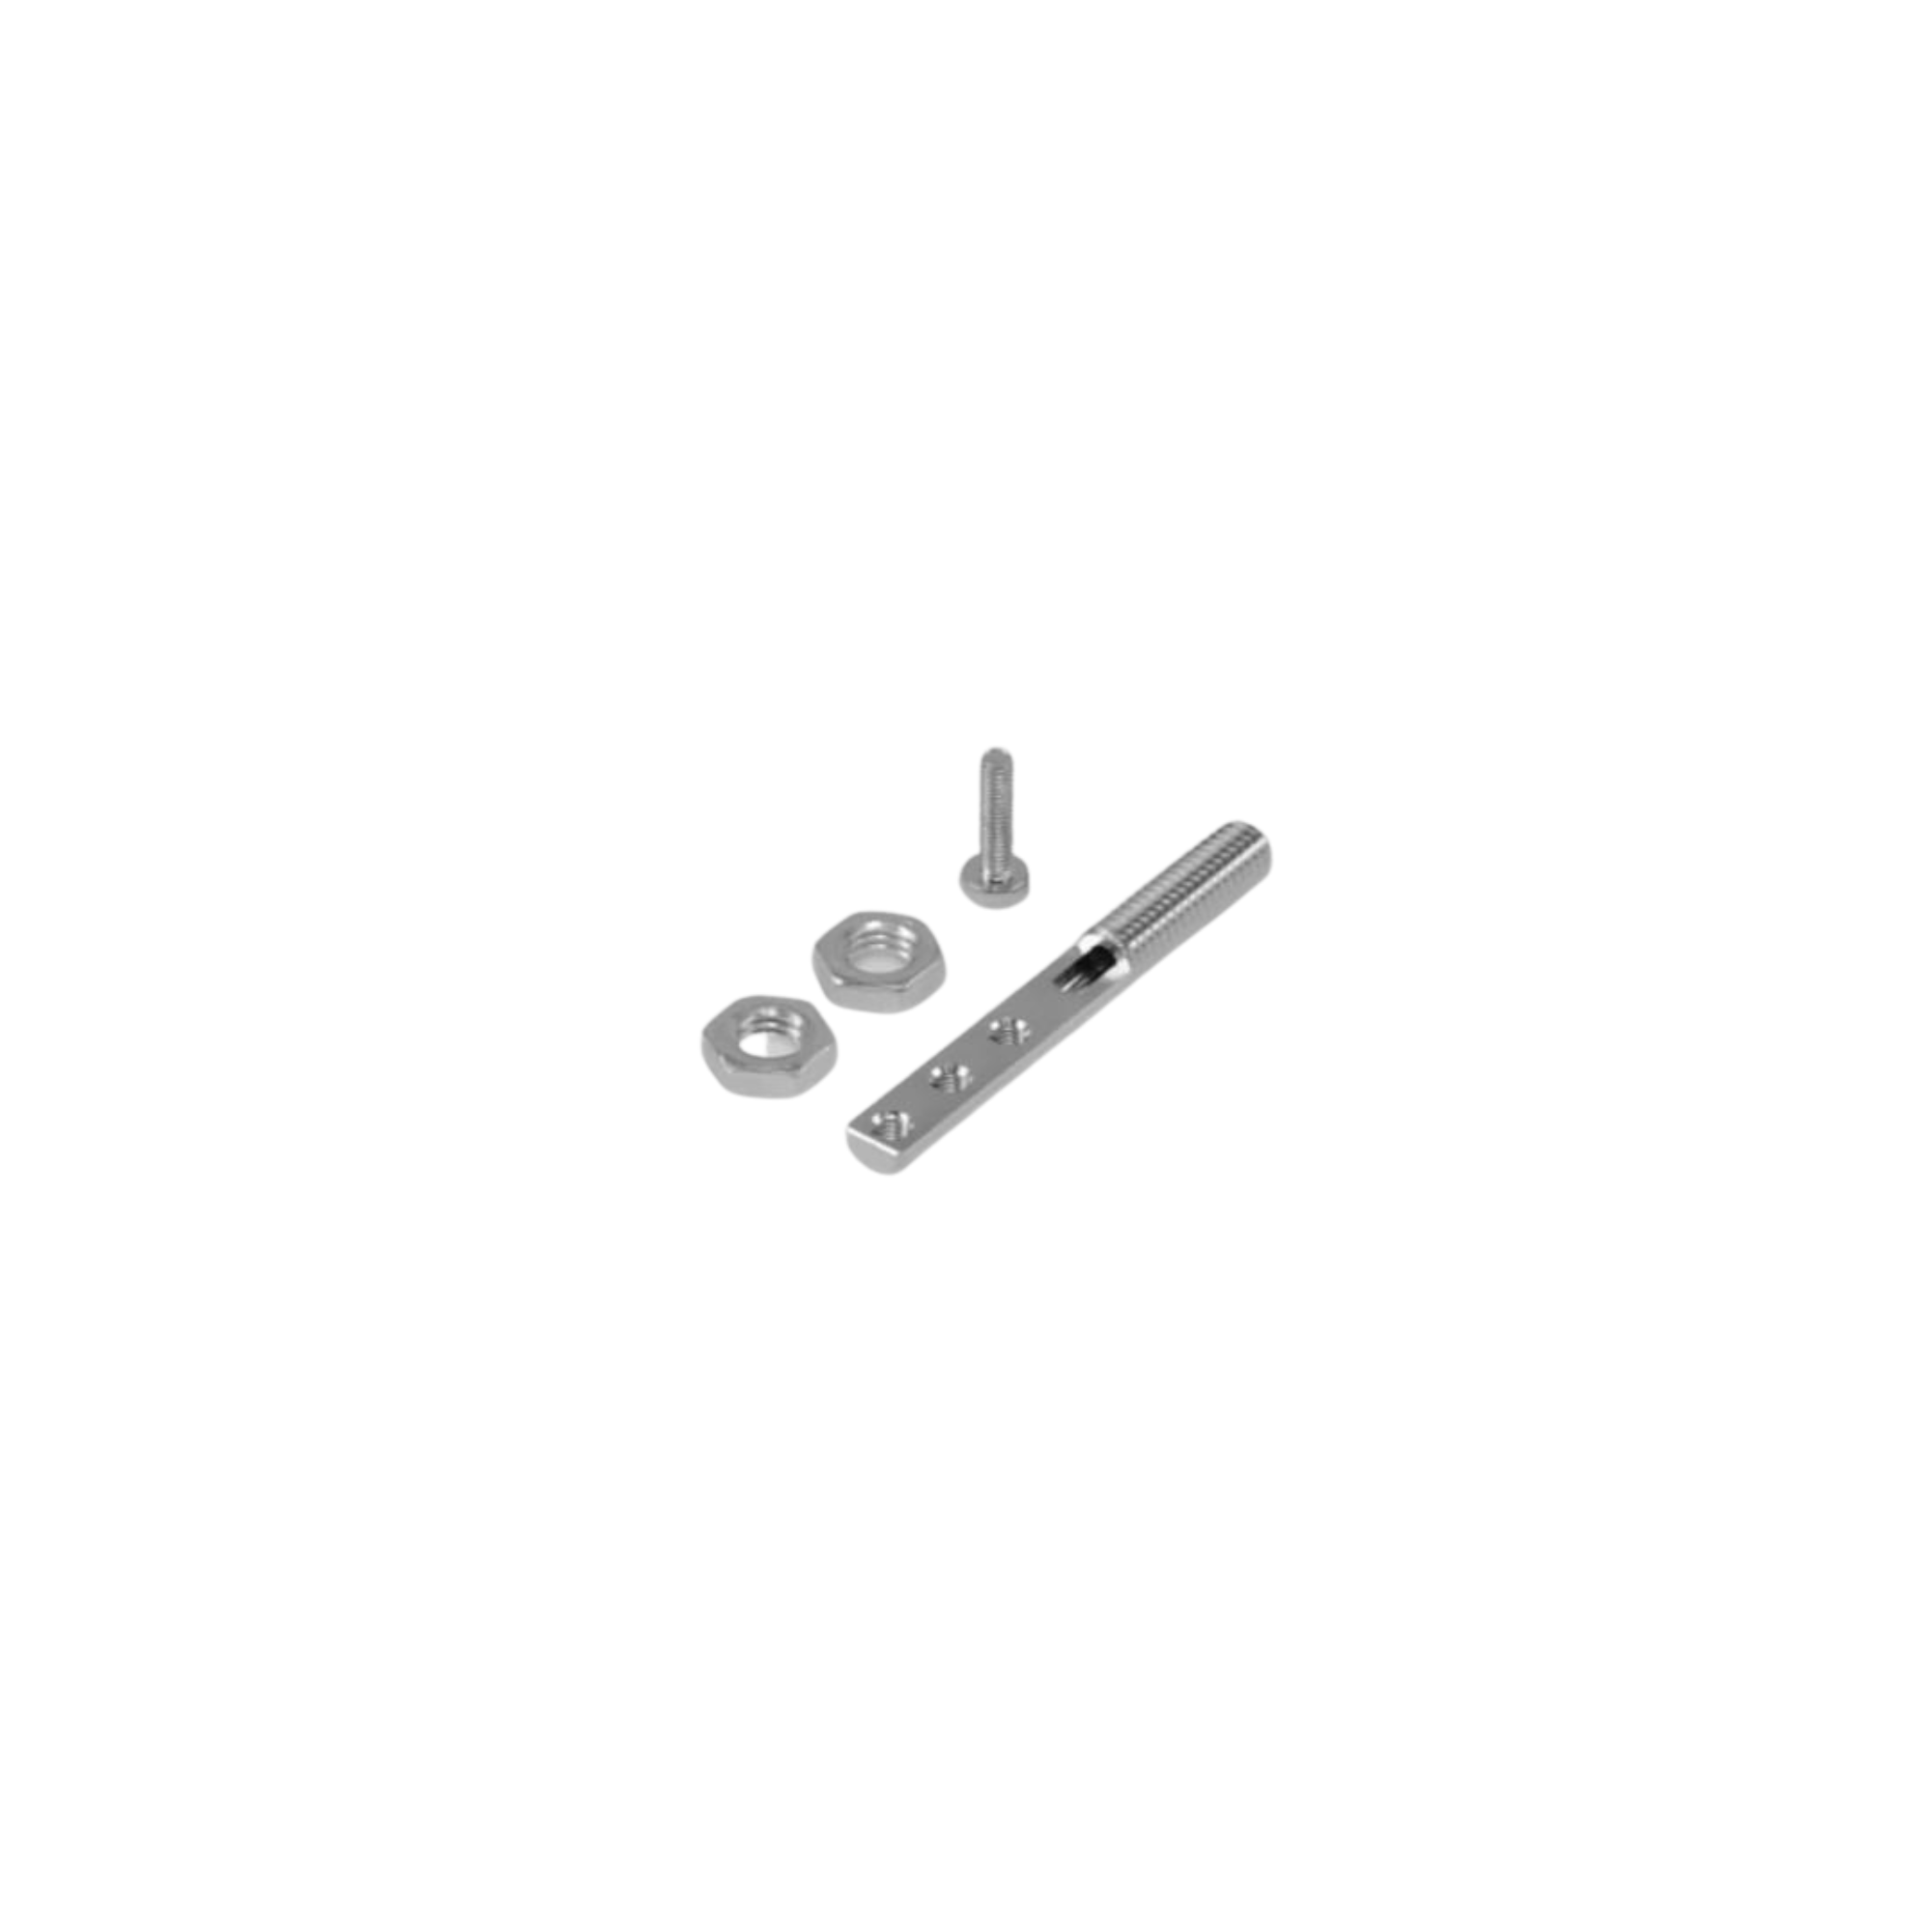 Two hexagon shaped nuts on the left next to an upside down screw with a long thin cylinder shaped mounting piece on the right